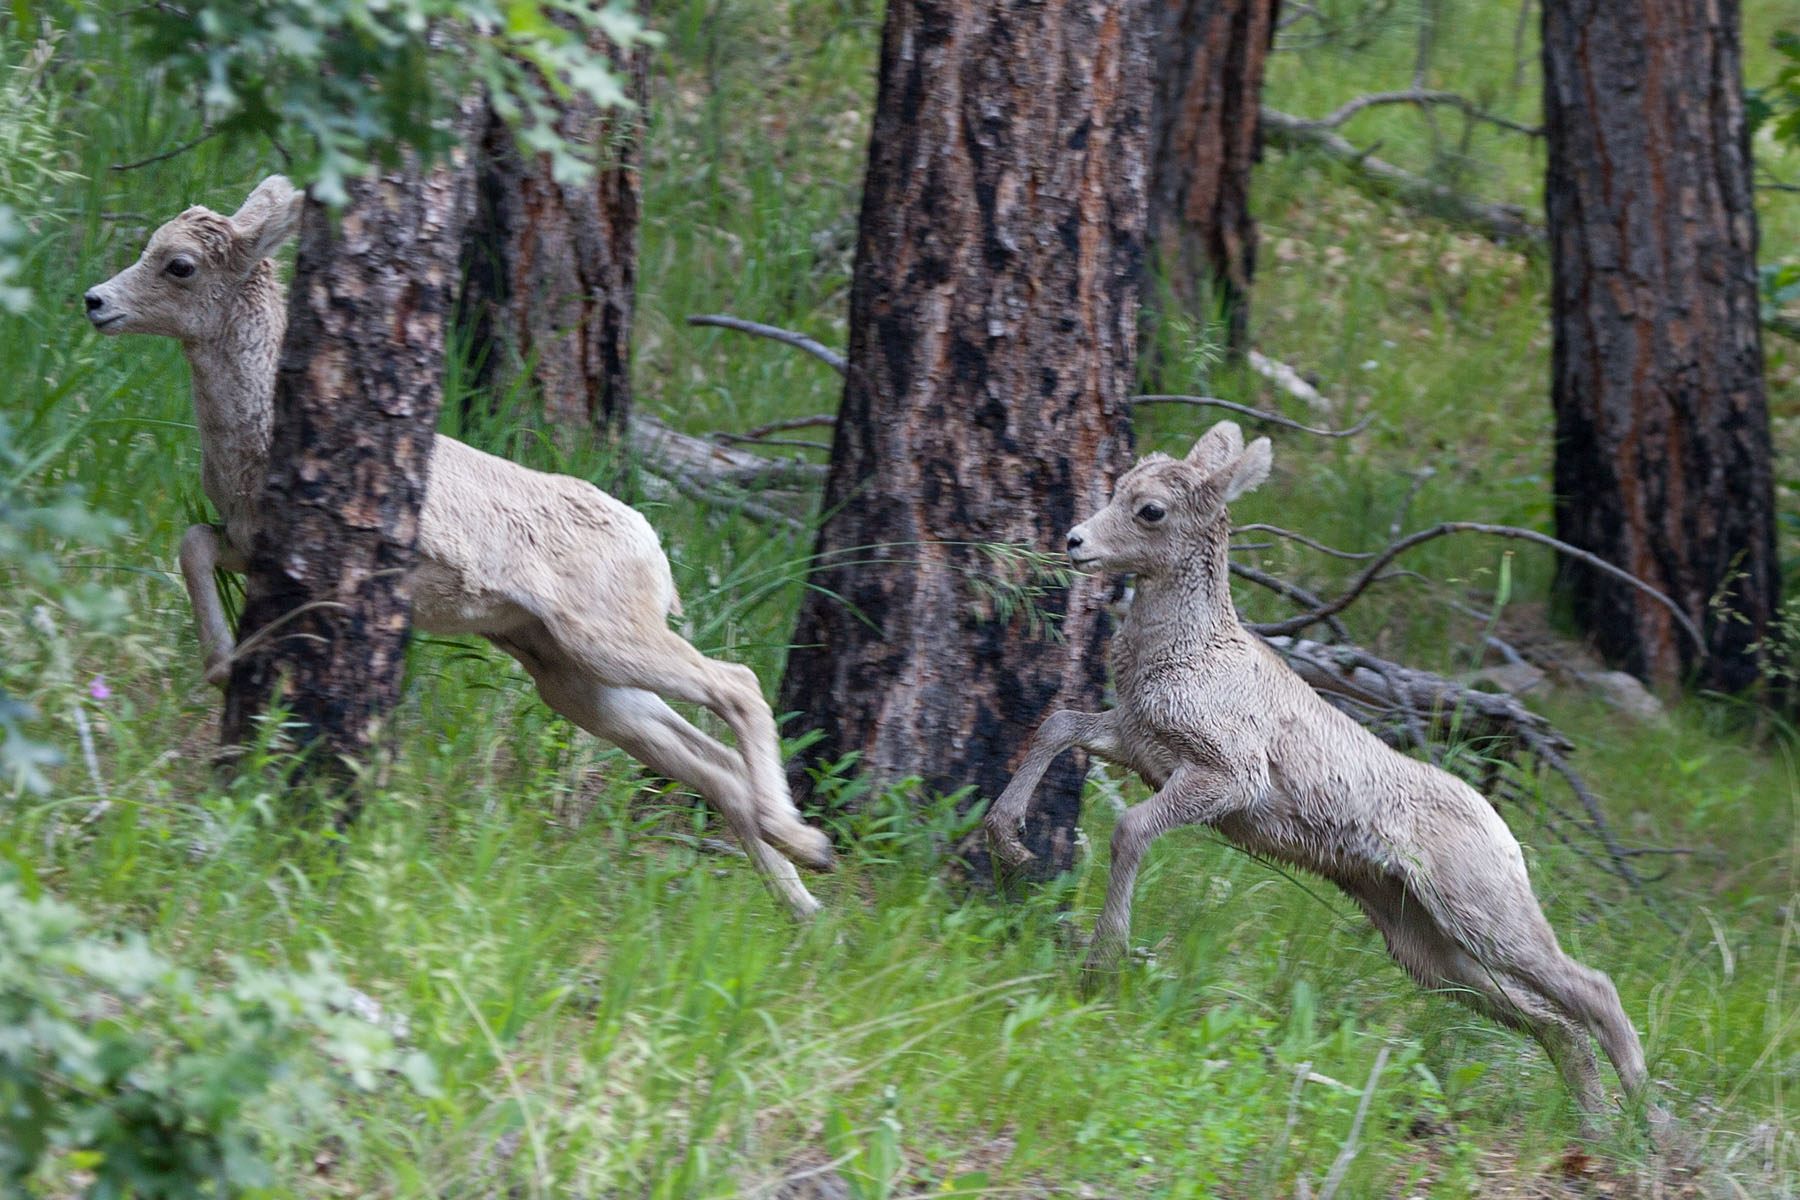 Rocky Mountain Bighorn lambs, Custer State Park.  Click for next photo.